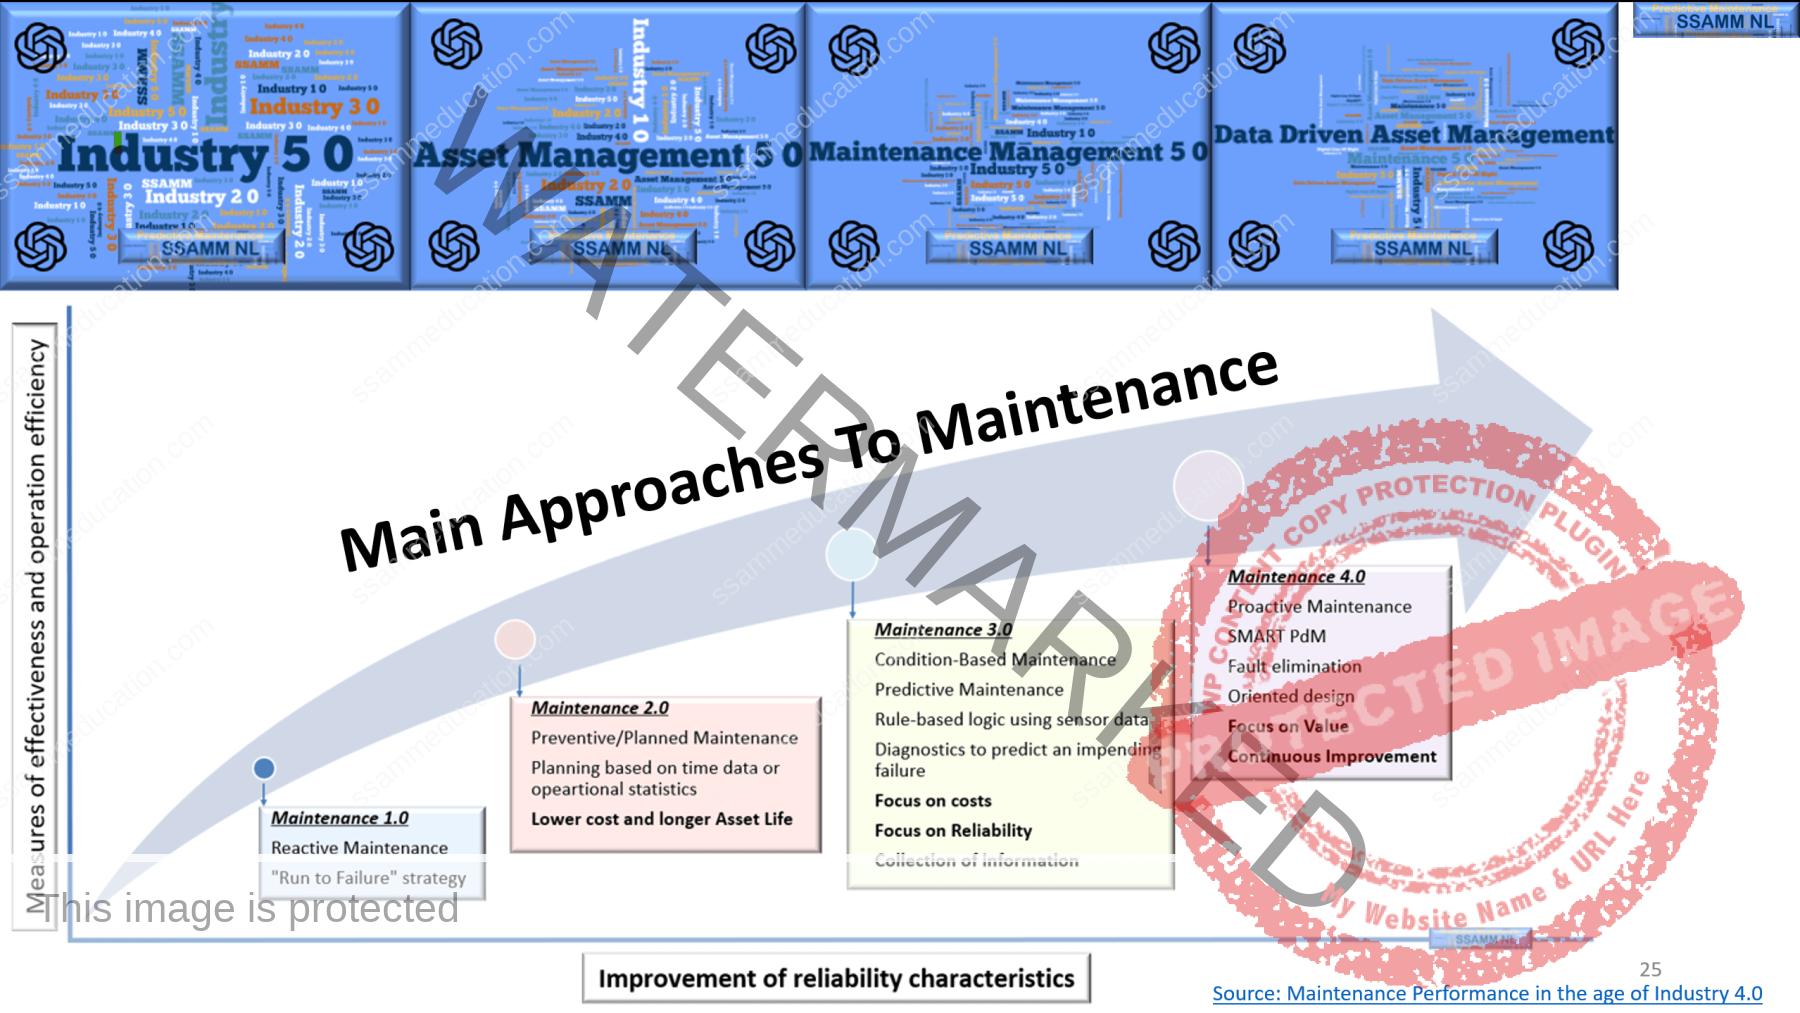 21.-Main-approaches-to-Maintenance-